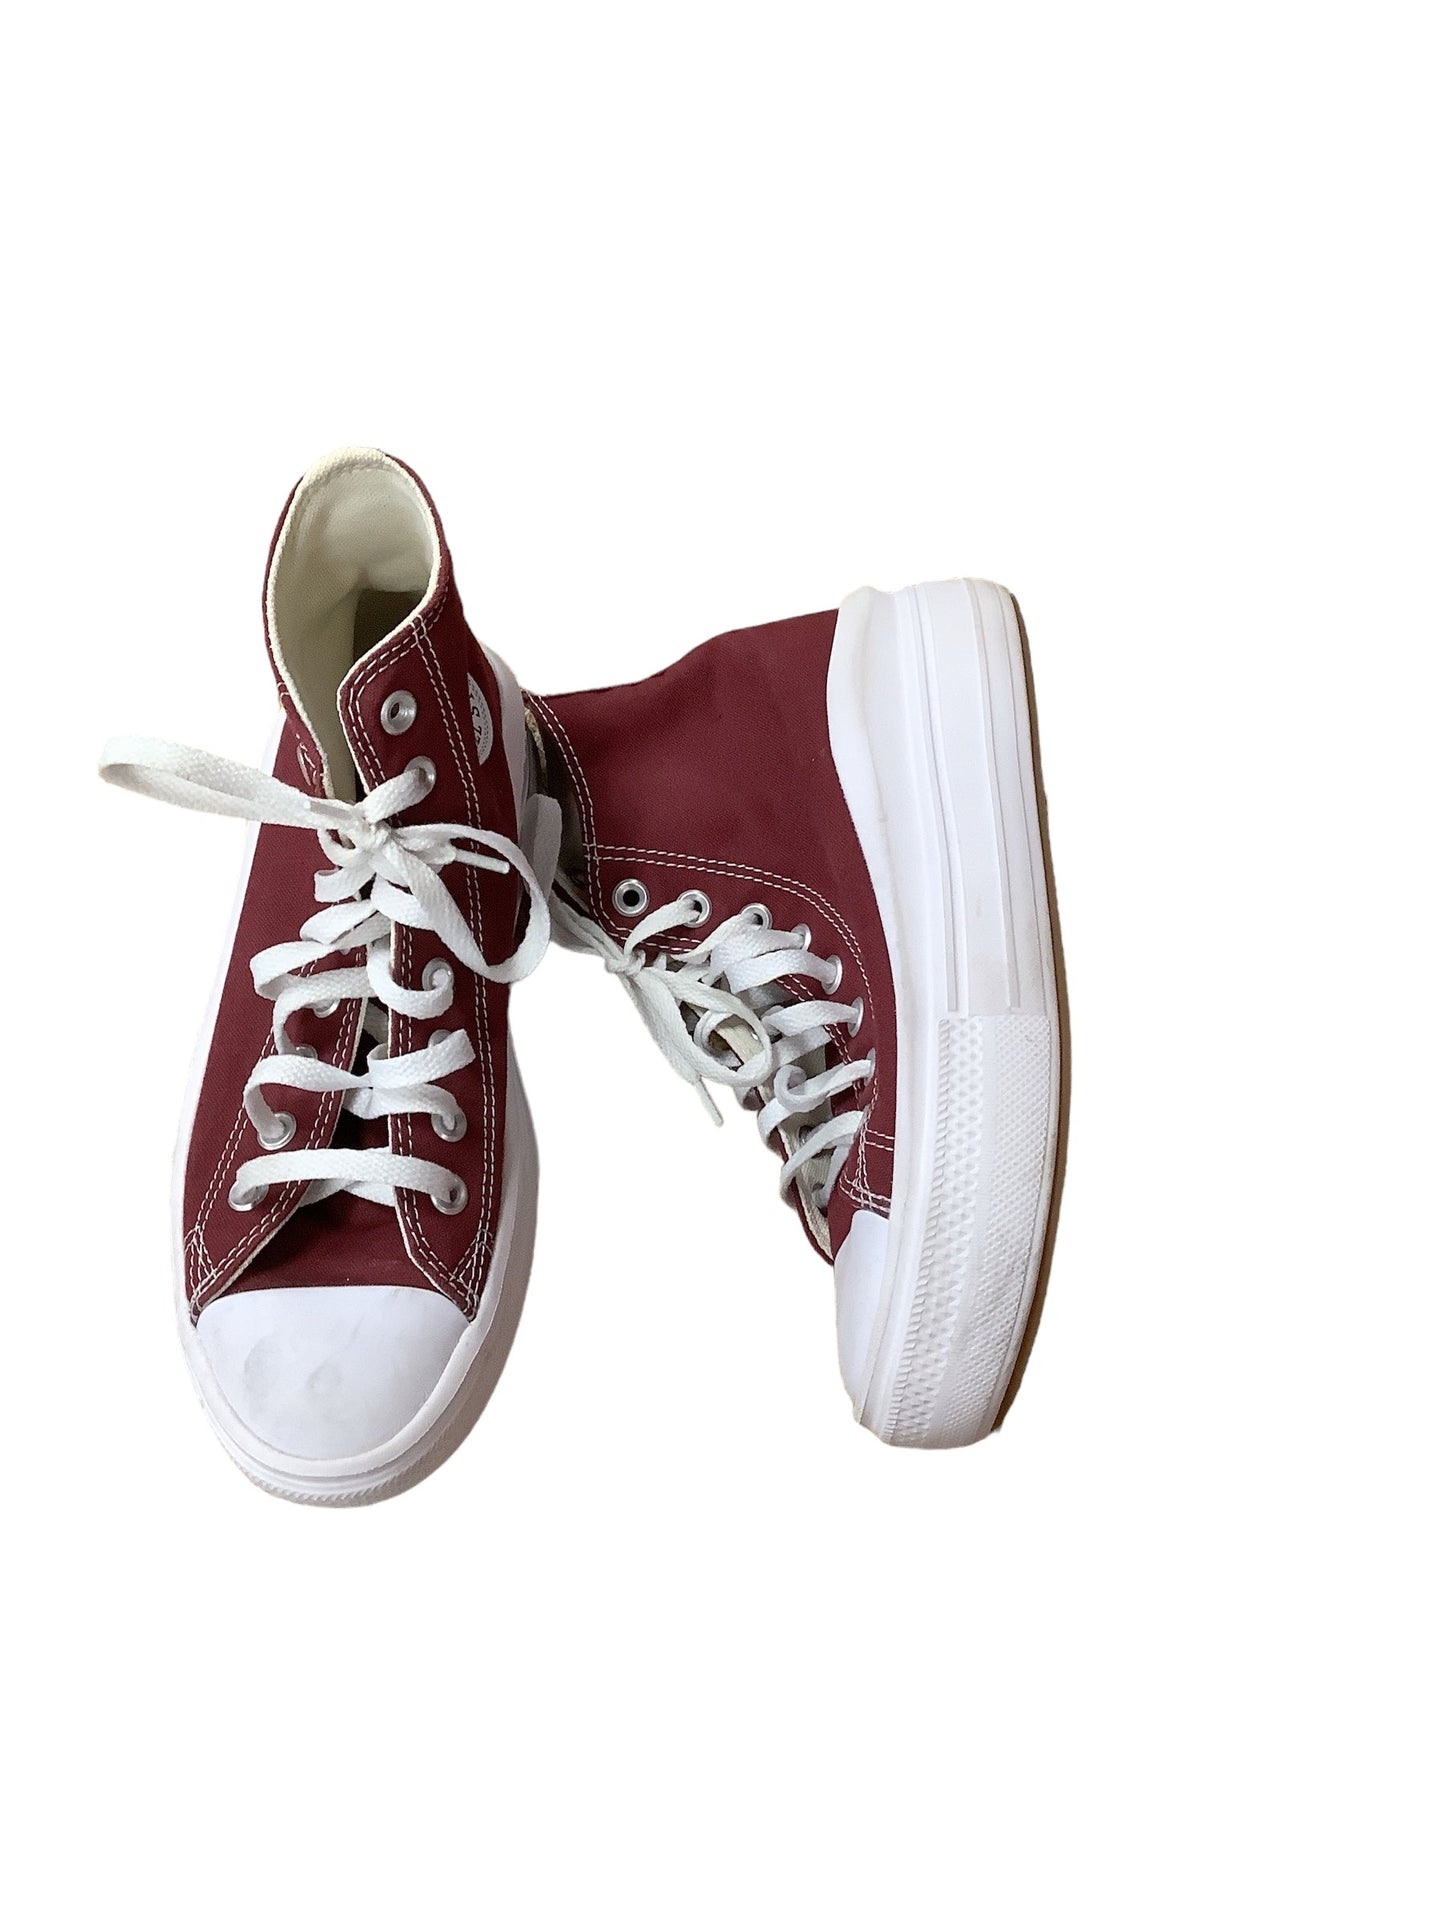 Red Shoes Sneakers Platform Converse, Size 8